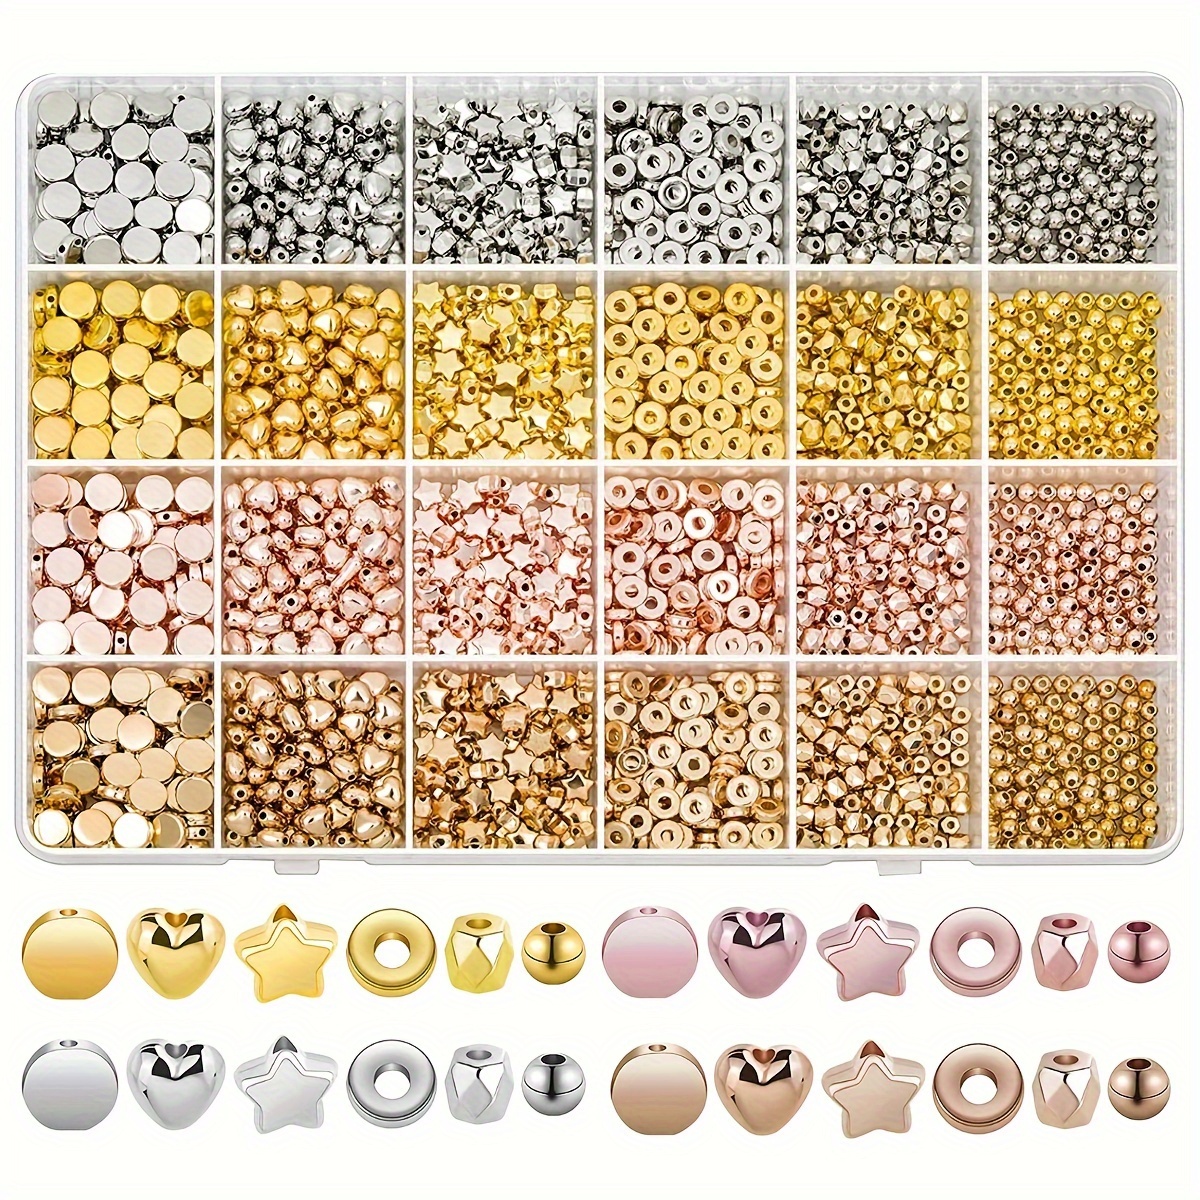 

2260pcs Irregular Shaped Ccb Spacer Beads, Ideal Accessories For Necklace Bracelet Keychain Jewelry